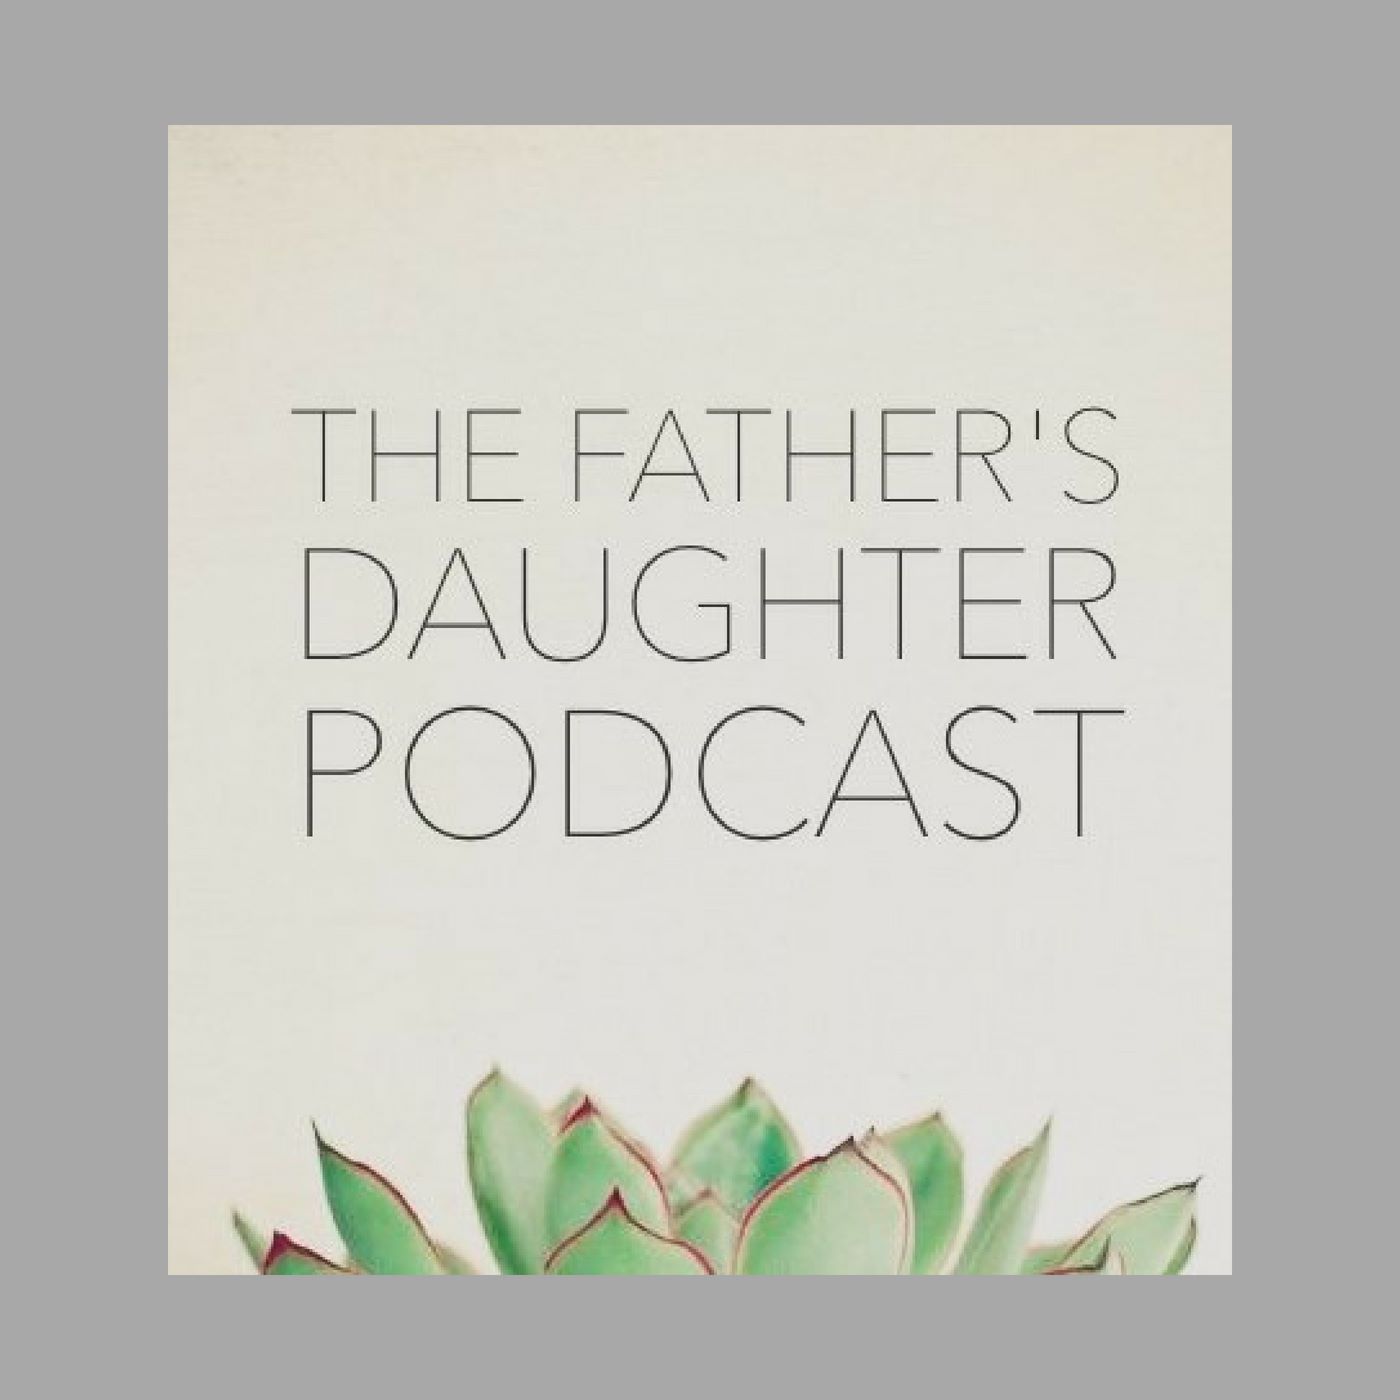 The Father's Daughter Podcast: Episode 2, The Camino de Santiago with Gaby